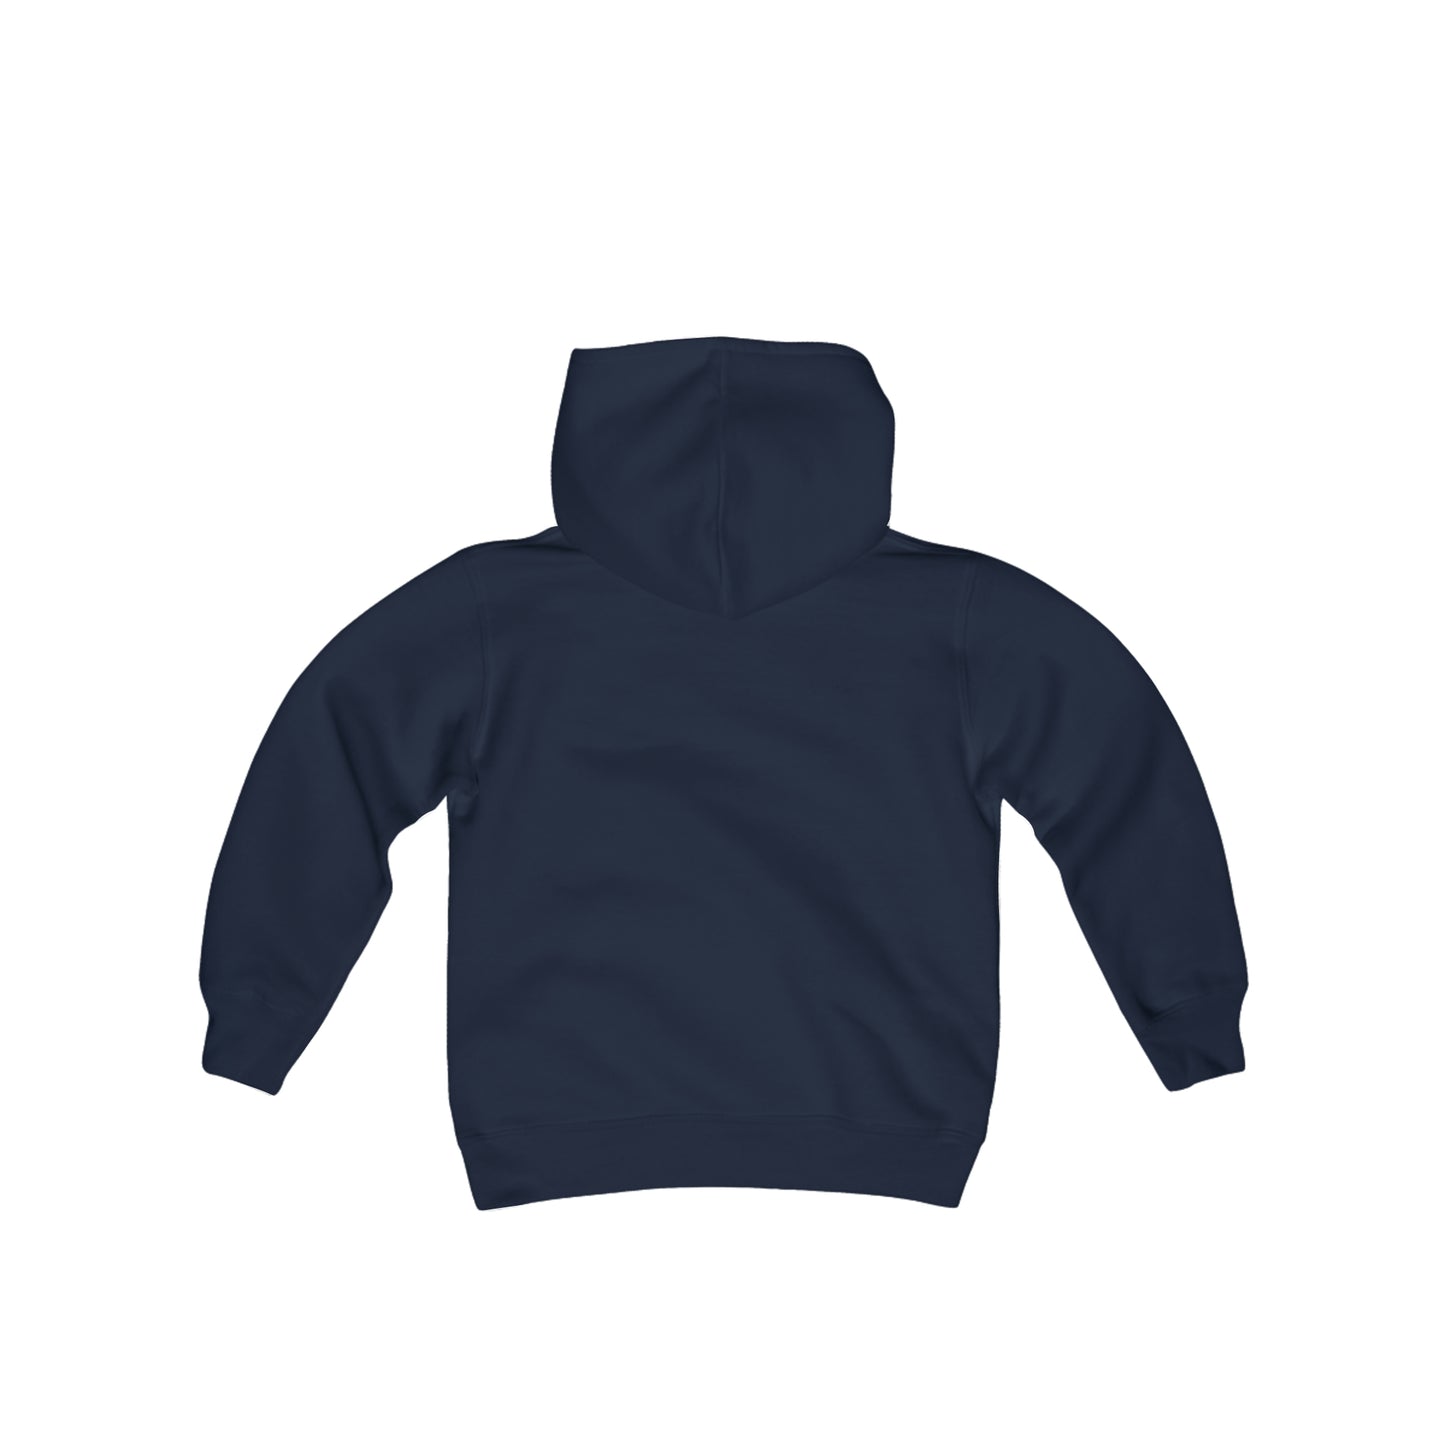 Youth Heavy Blend Hooded Sweatshirt, South Tiger Face (Multiple Colors Available)